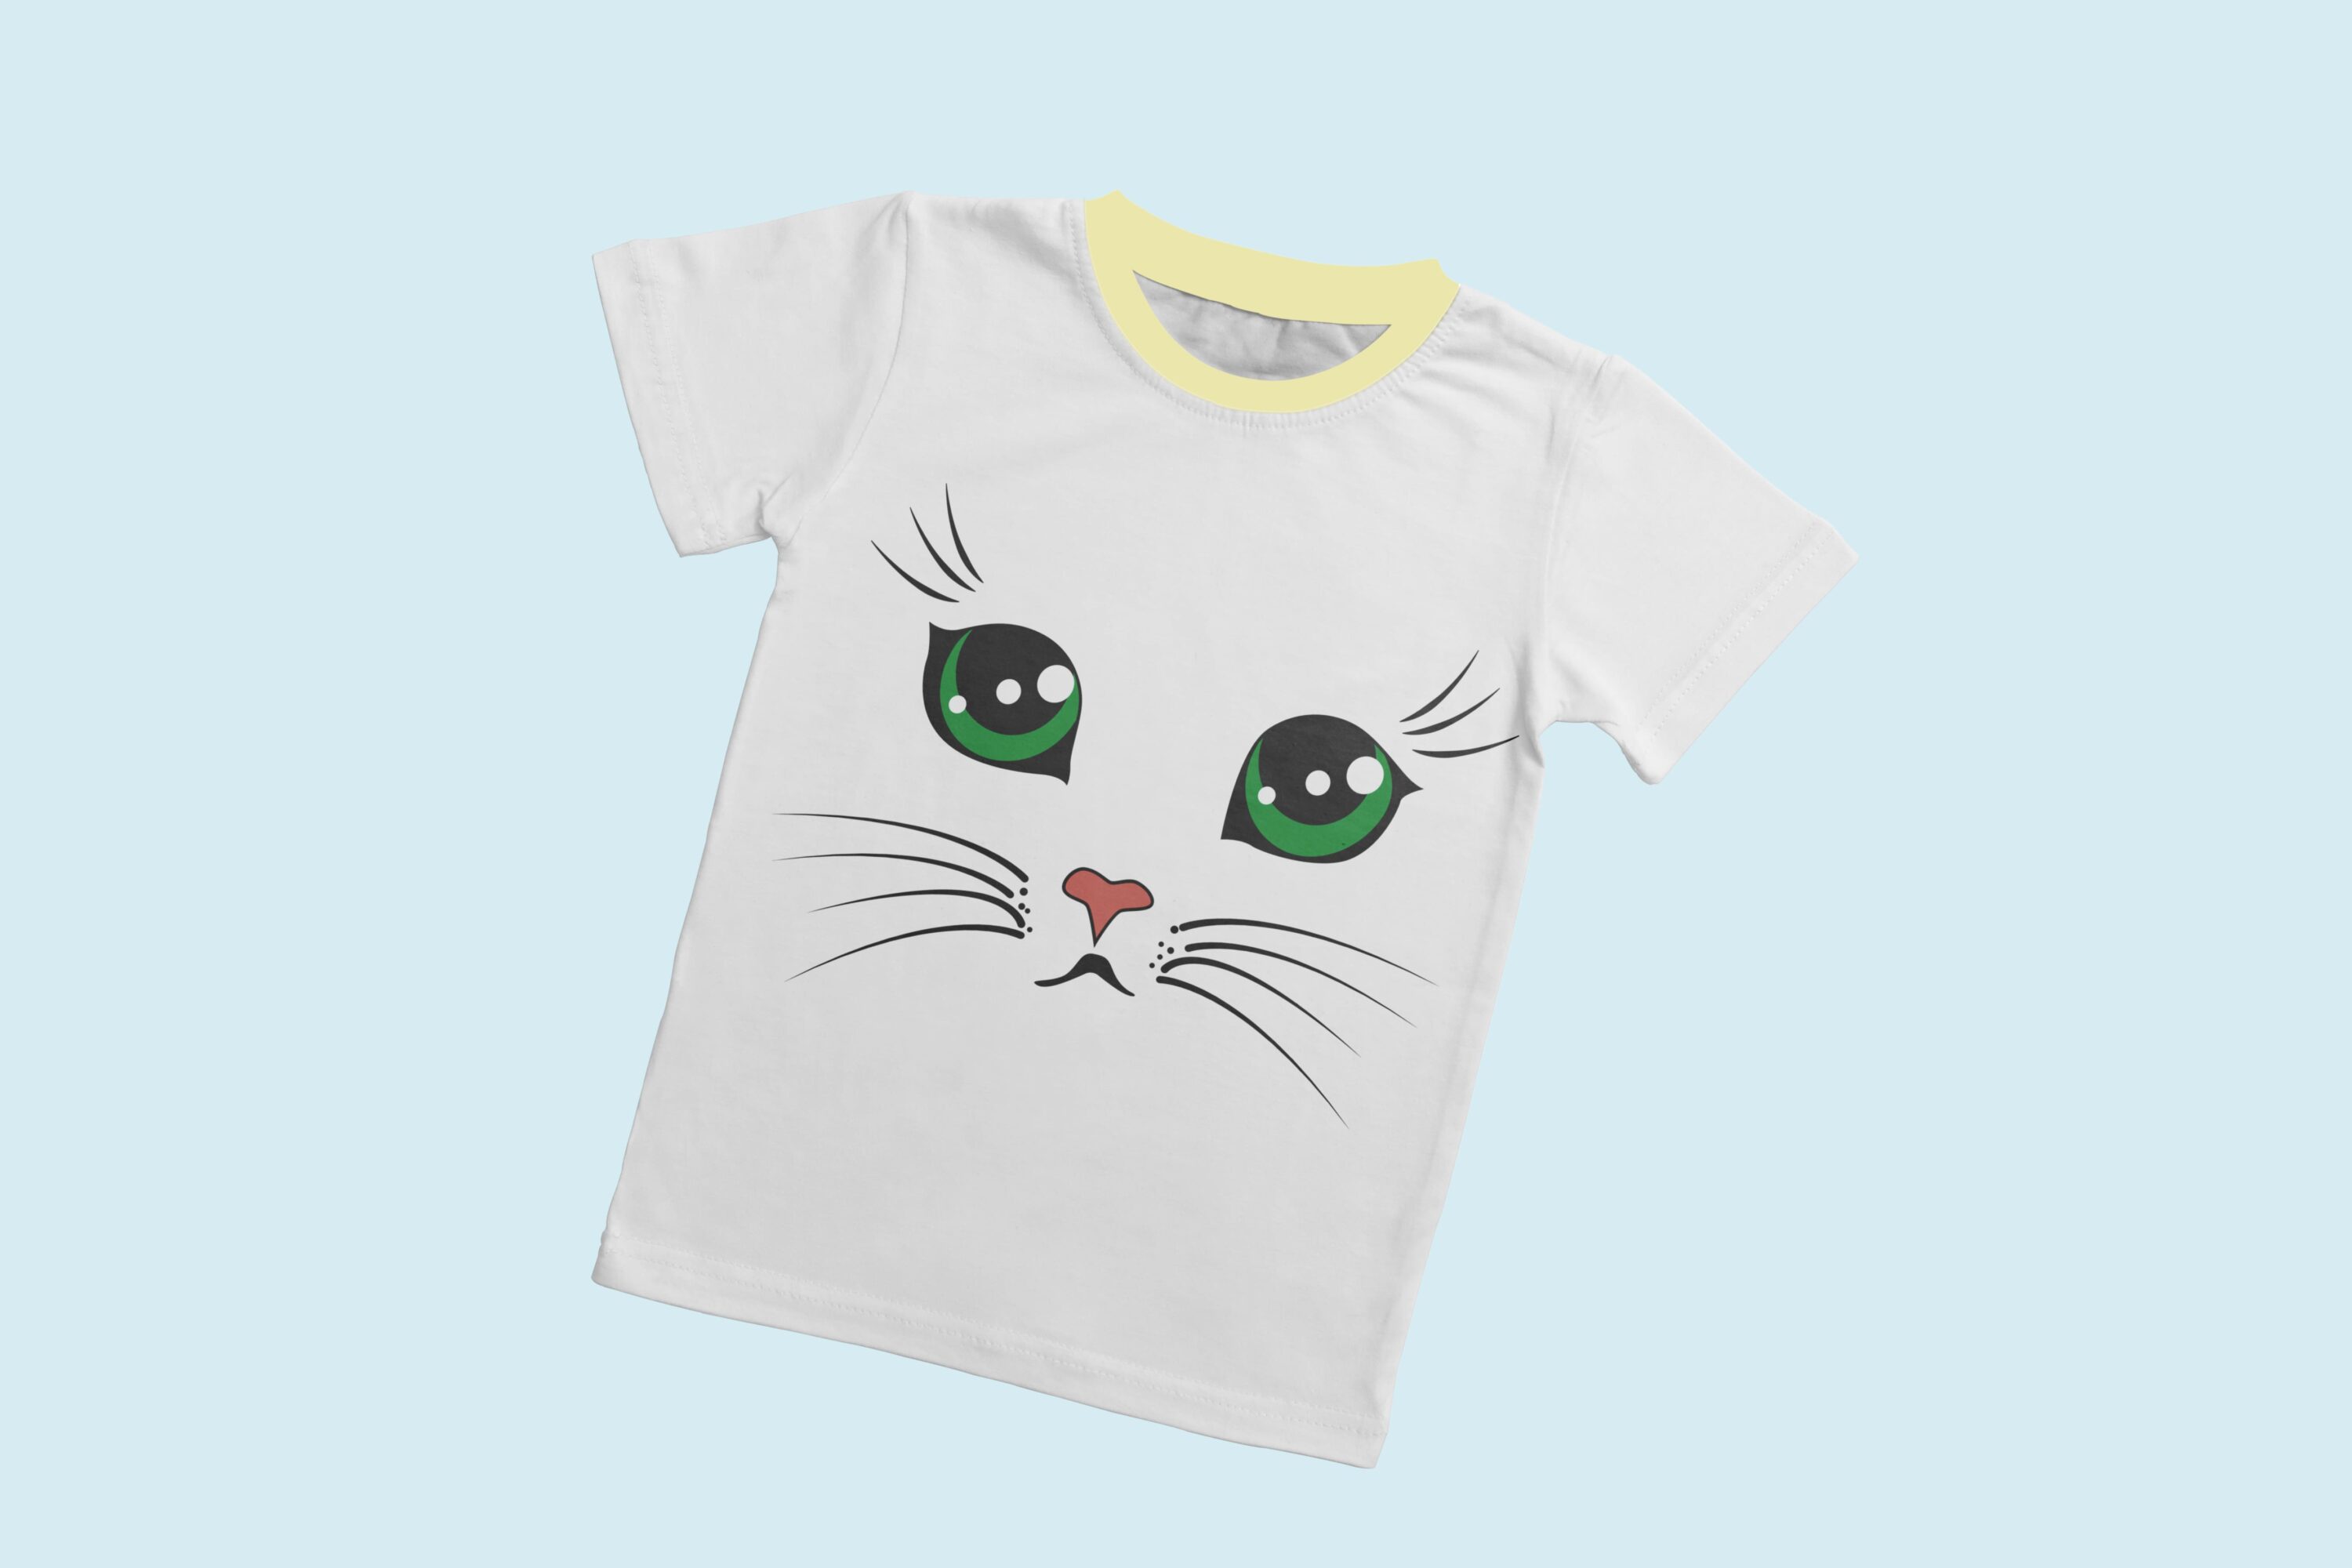 A white T-shirt with a light yellow collar and the face of an offended cat with green eyes.